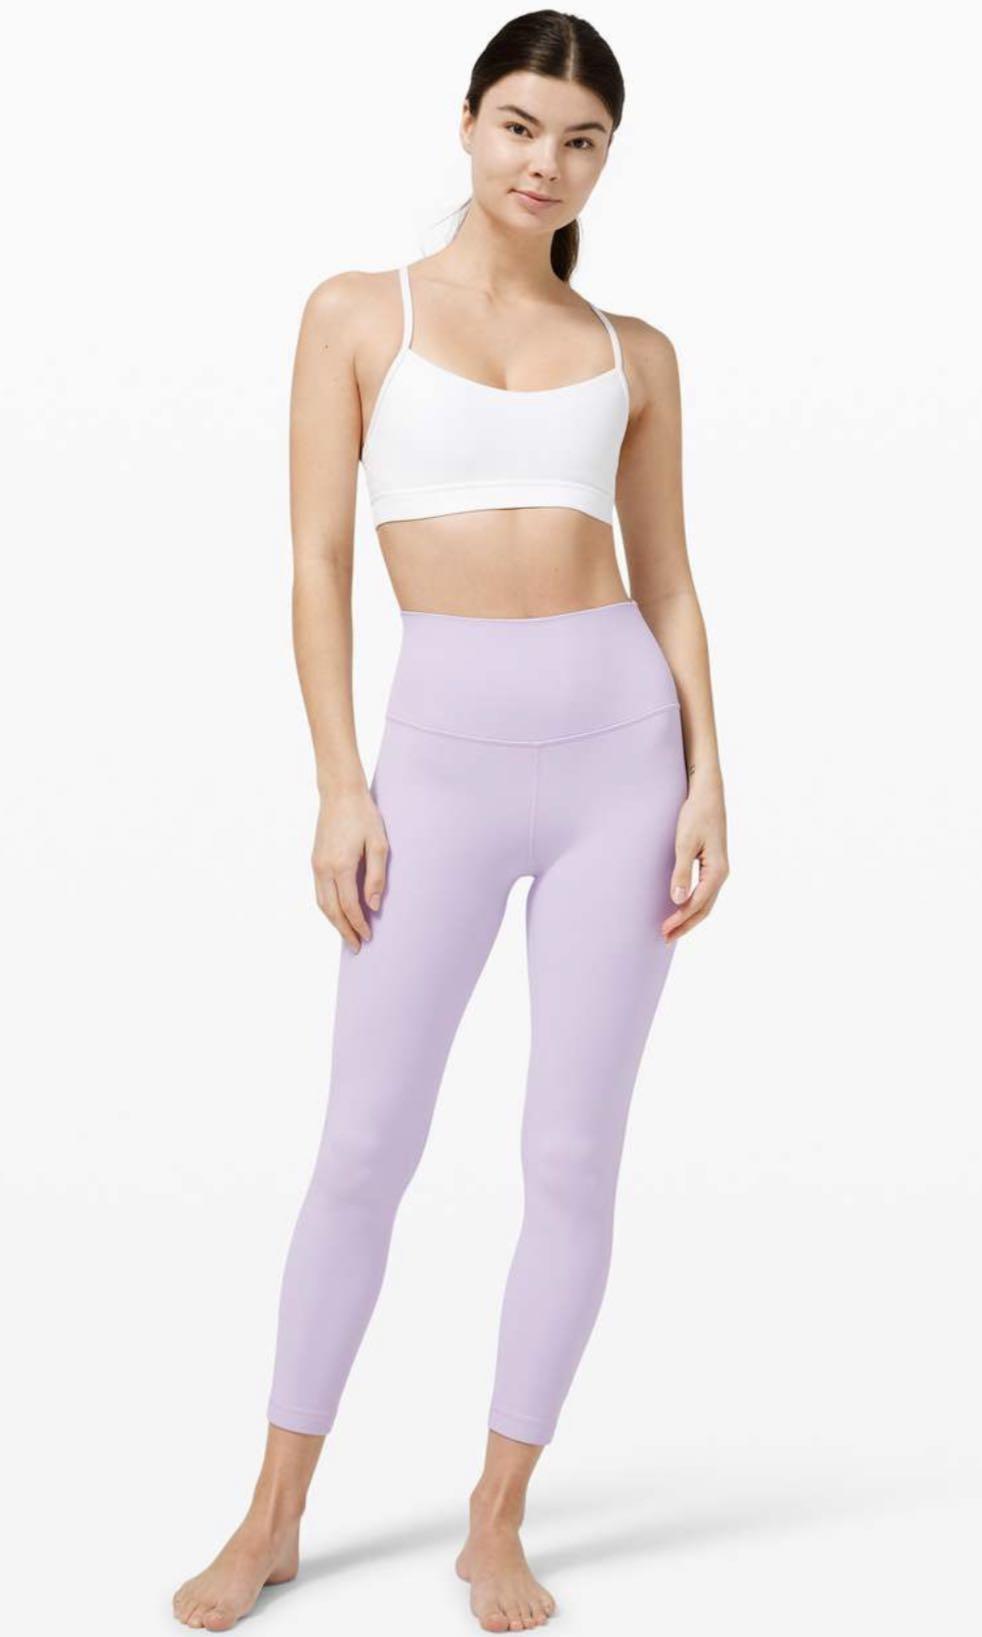 Align tank lavender dew (6) paired with Align short 6” WFSNB (6) i love  this color pairing! The lighter bottoms look so good with a light top! : r/ lululemon